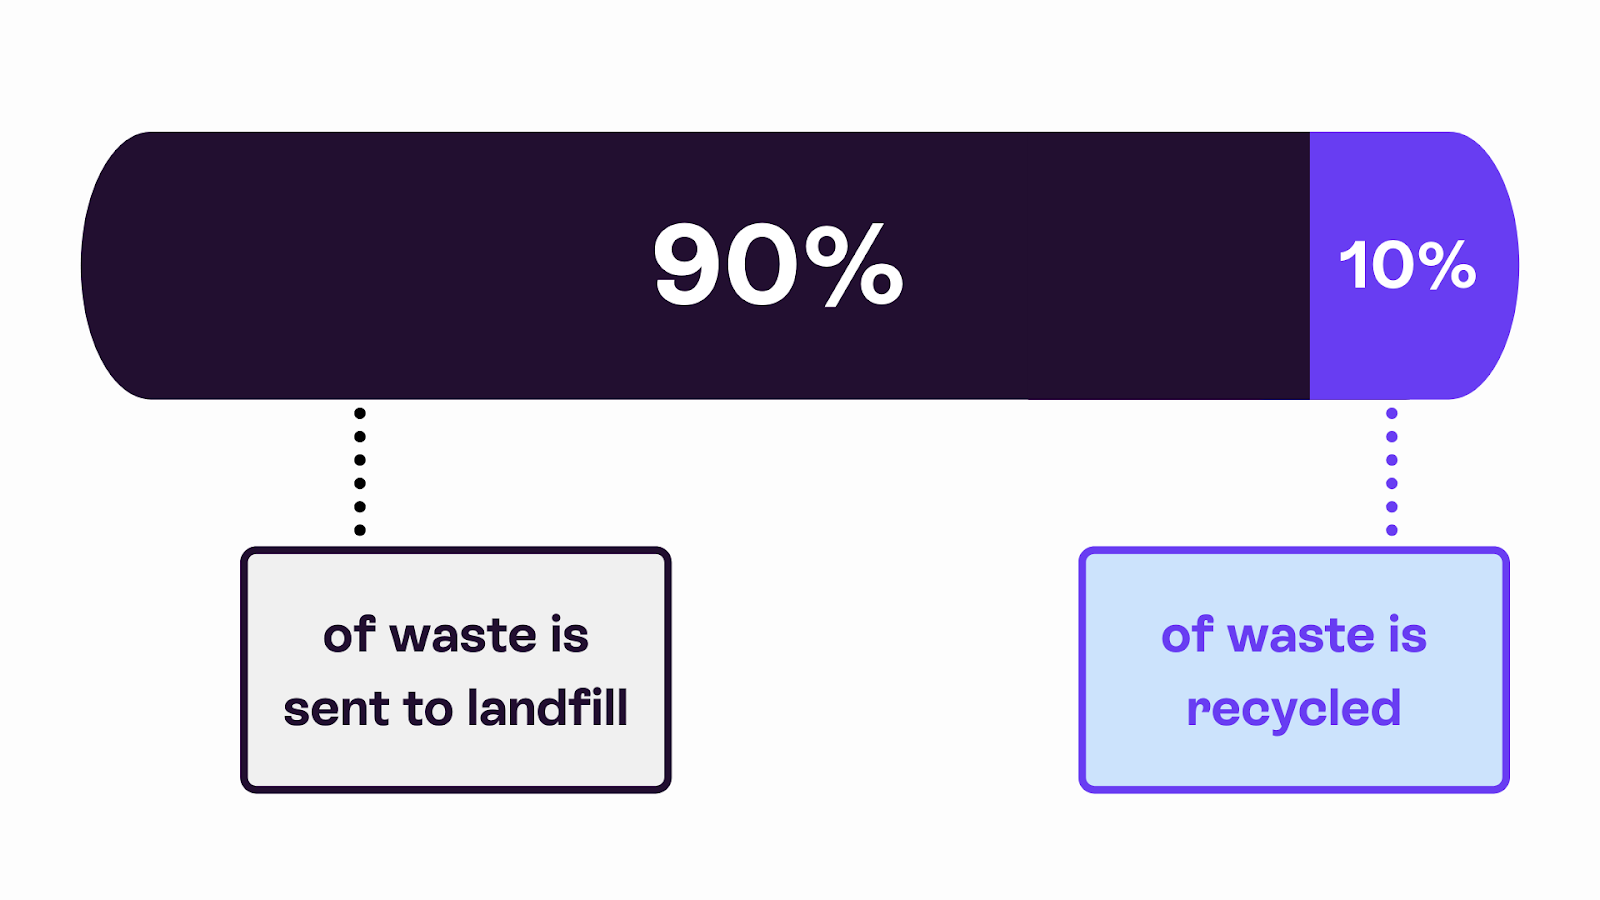 90% of rubbish is sent to landfill